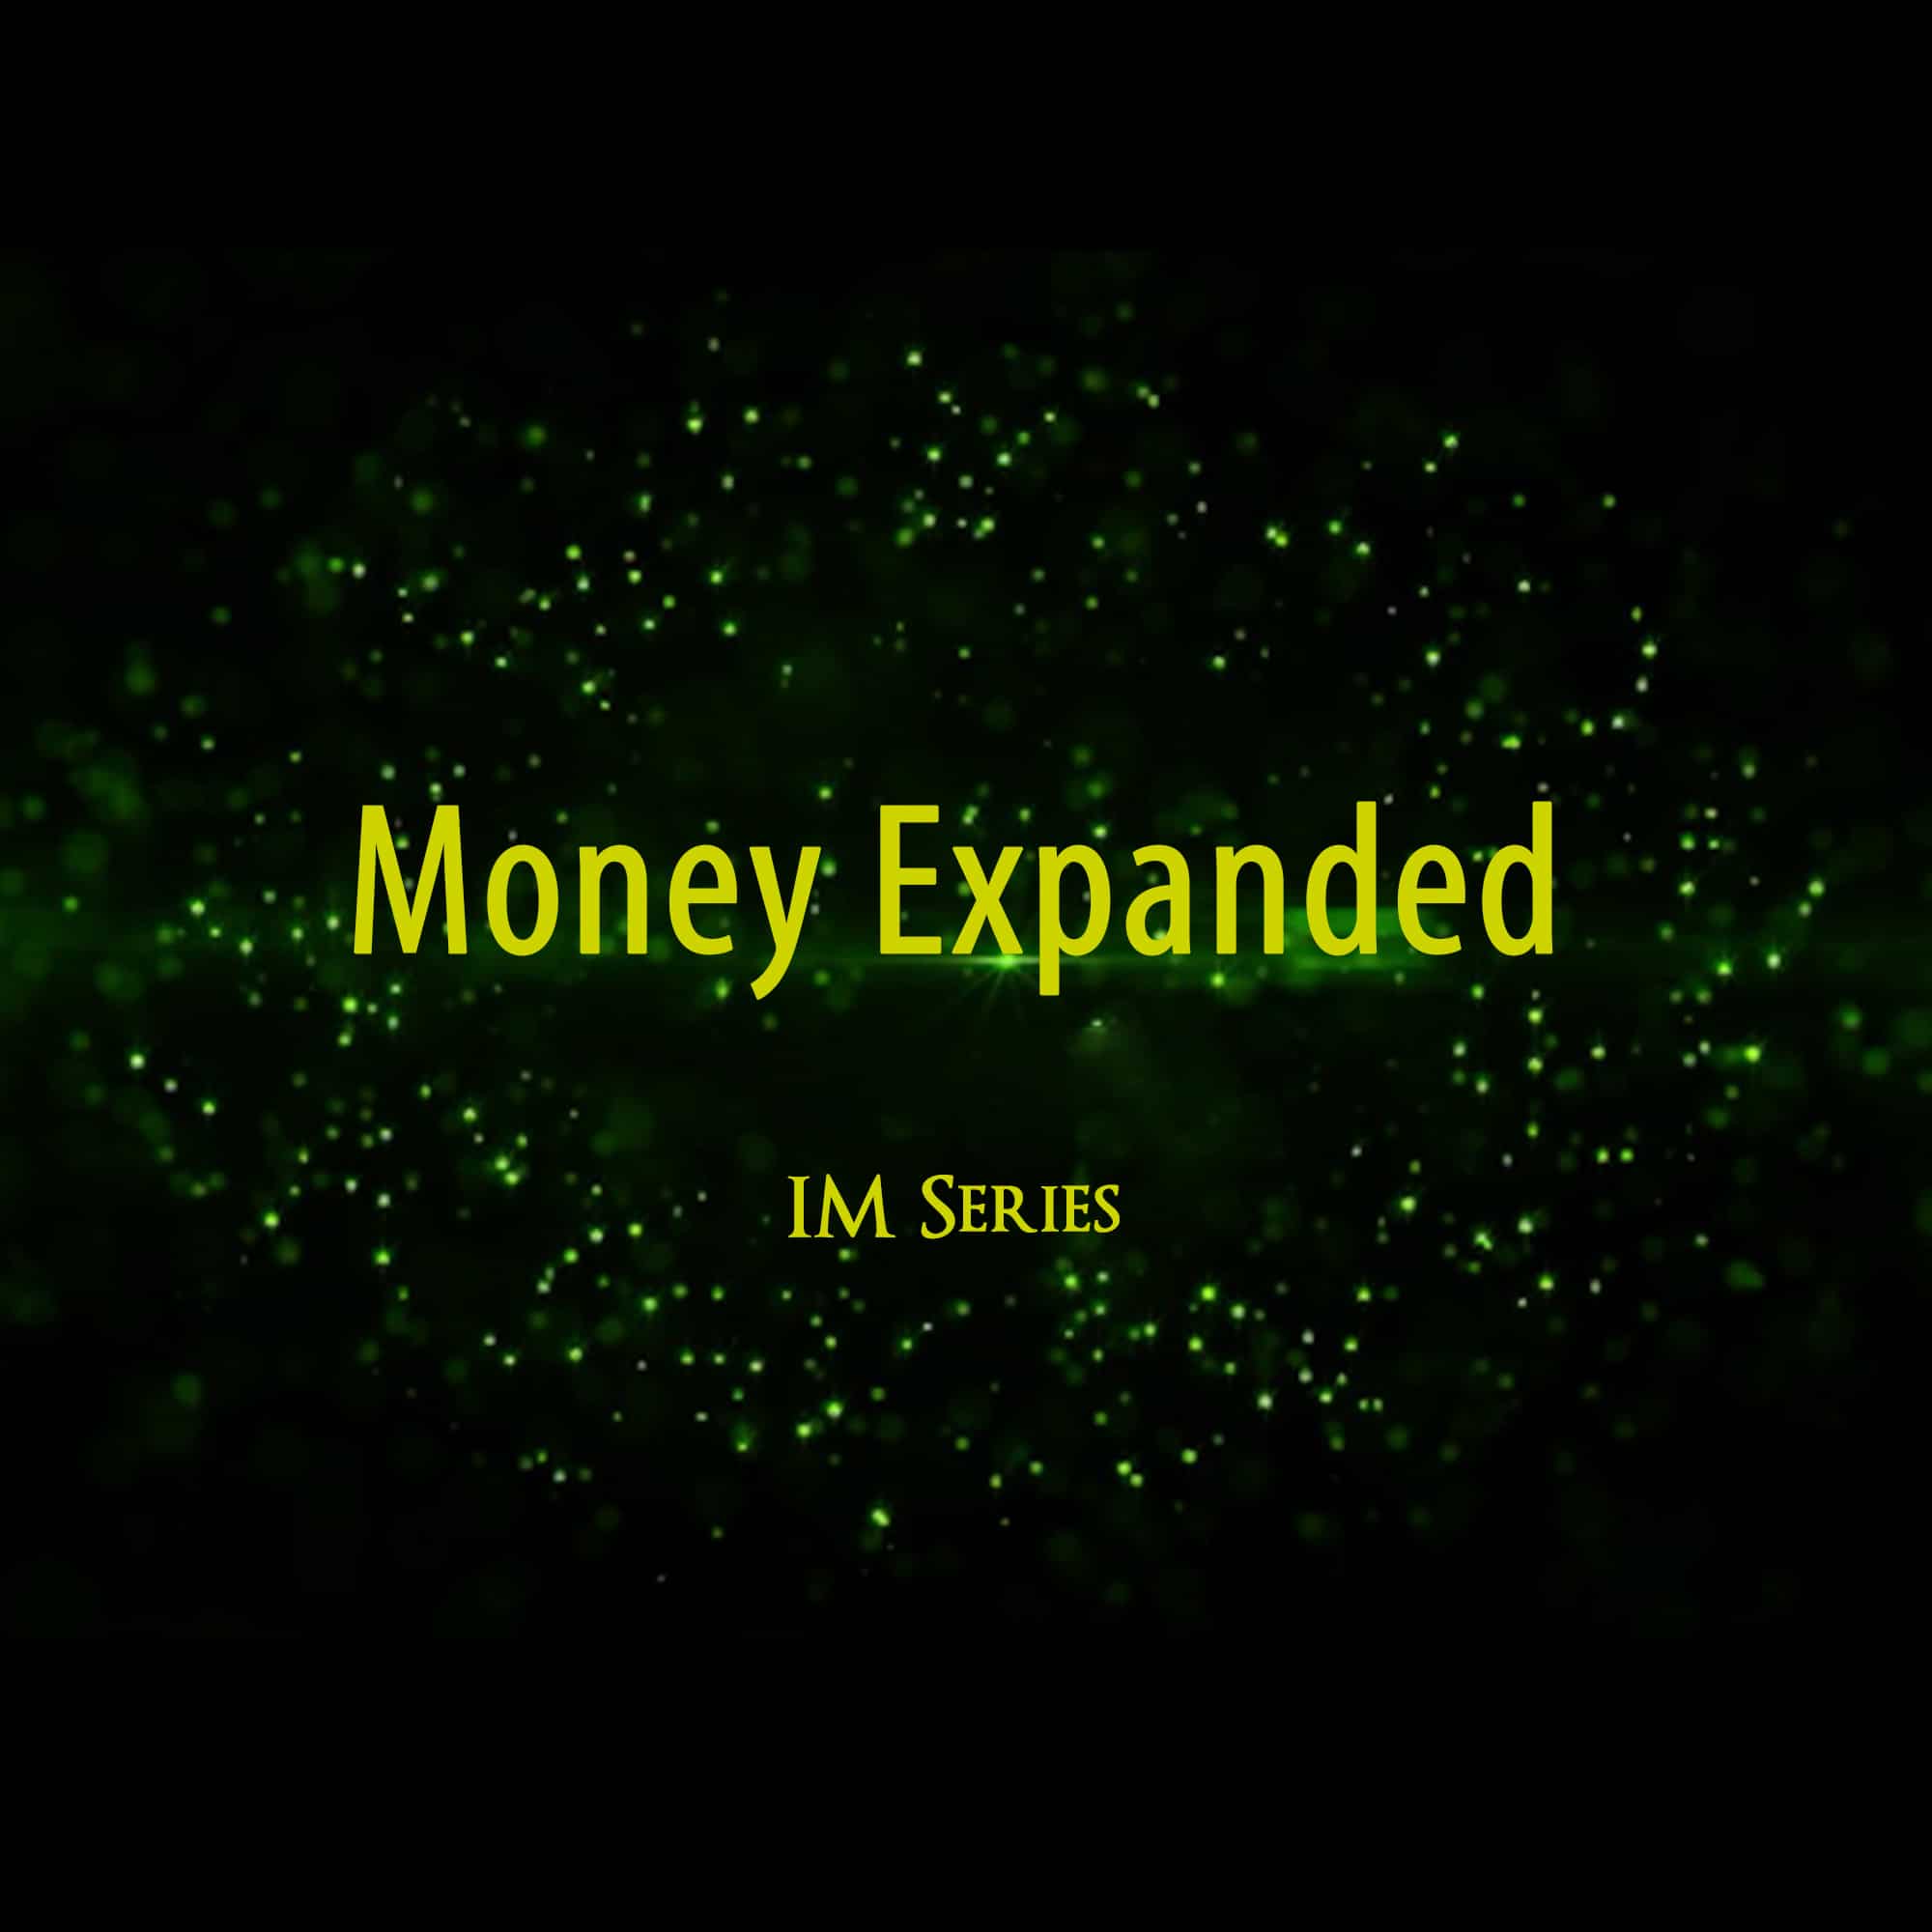 In this IM Series all about Money Expanded, we look at the evolution of money as we move through consciousness. First, by exploring money as energy, instead of simply matter, we see how stress or anxiety about money produces the opposite result from what we say we want. Next we get more abstract by looking at what money can indicate to us when we are able to view it as a reflection of ourselves. And, lastly, we dive into the heart of the matter and look at why we must move into harmony with money if we want our visions and dreams to create impact. Join us in this series #moneyExpanded #Money #MoneyAsEnergy #MoneyAsReflection #MoneyAsImpact #consciousness #journey #impact #anxiety #energy #reflection #MoneyMatters #harmony #paradigms #stories #IMSeries #community #superpowerexperts